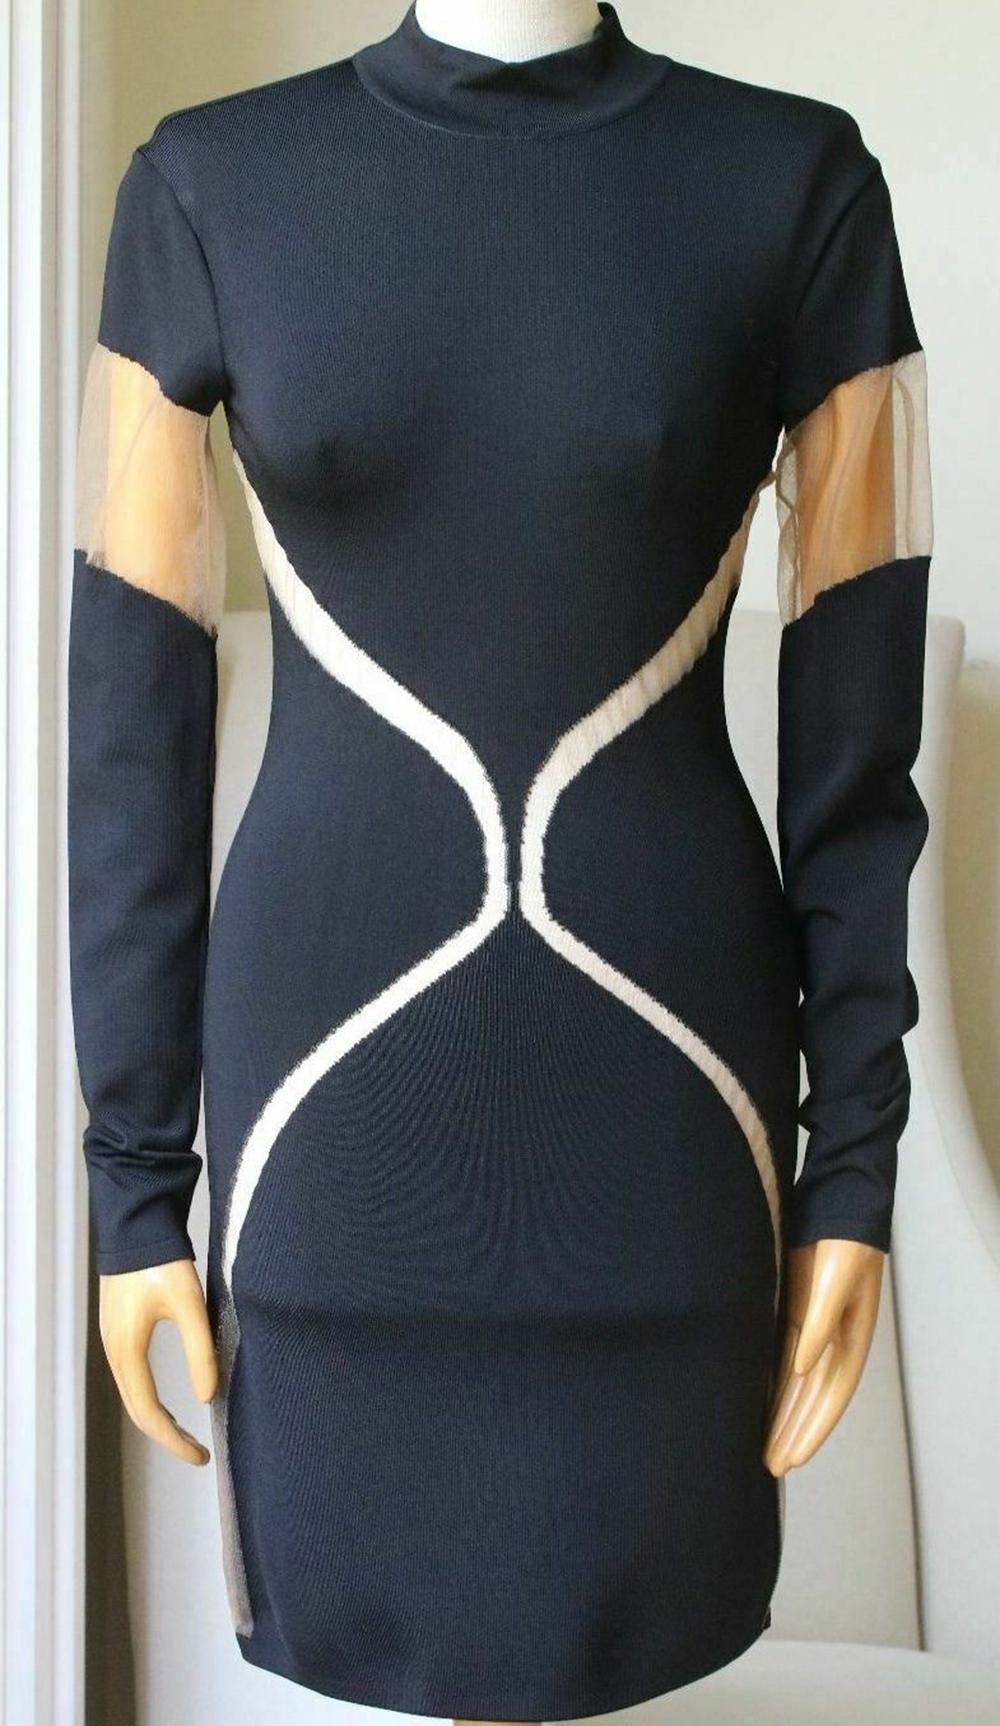 Balmain black and beige dress. Stretch-knit. Padded shoulders, tulle panels. Zip fastening along back. 99% Viscose, 1% polyamide.

Size: FR 38 (UK 10, US 6, IT 42)

Condition: As new condition, no sign of wear. 